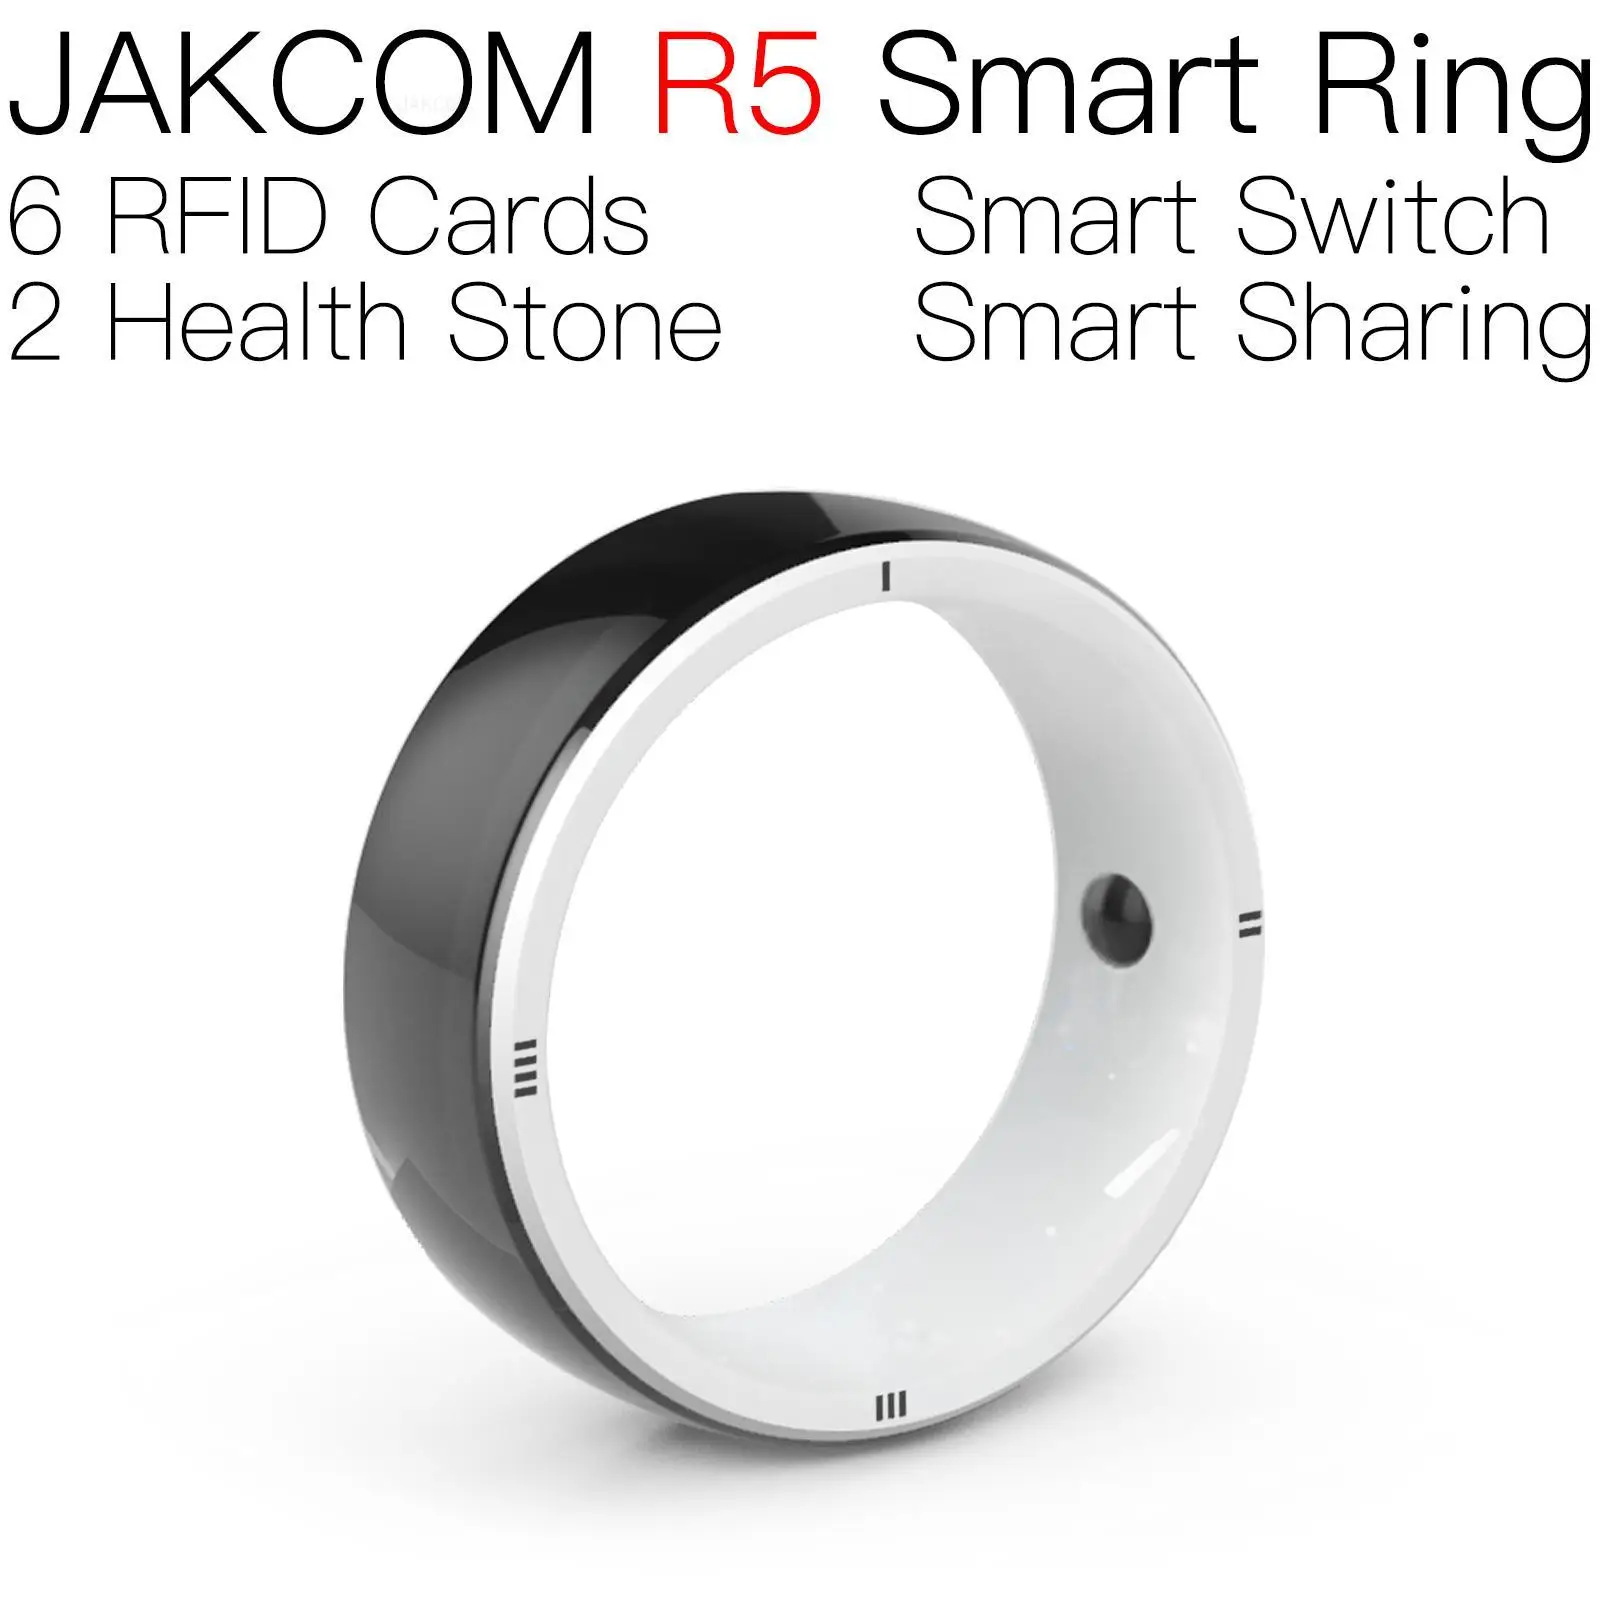 

JAKCOM R5 Smart Ring Newer than nfc chip for mobile realmi offical store sle4442 with icopy pvc id card blanks mhz smartphone